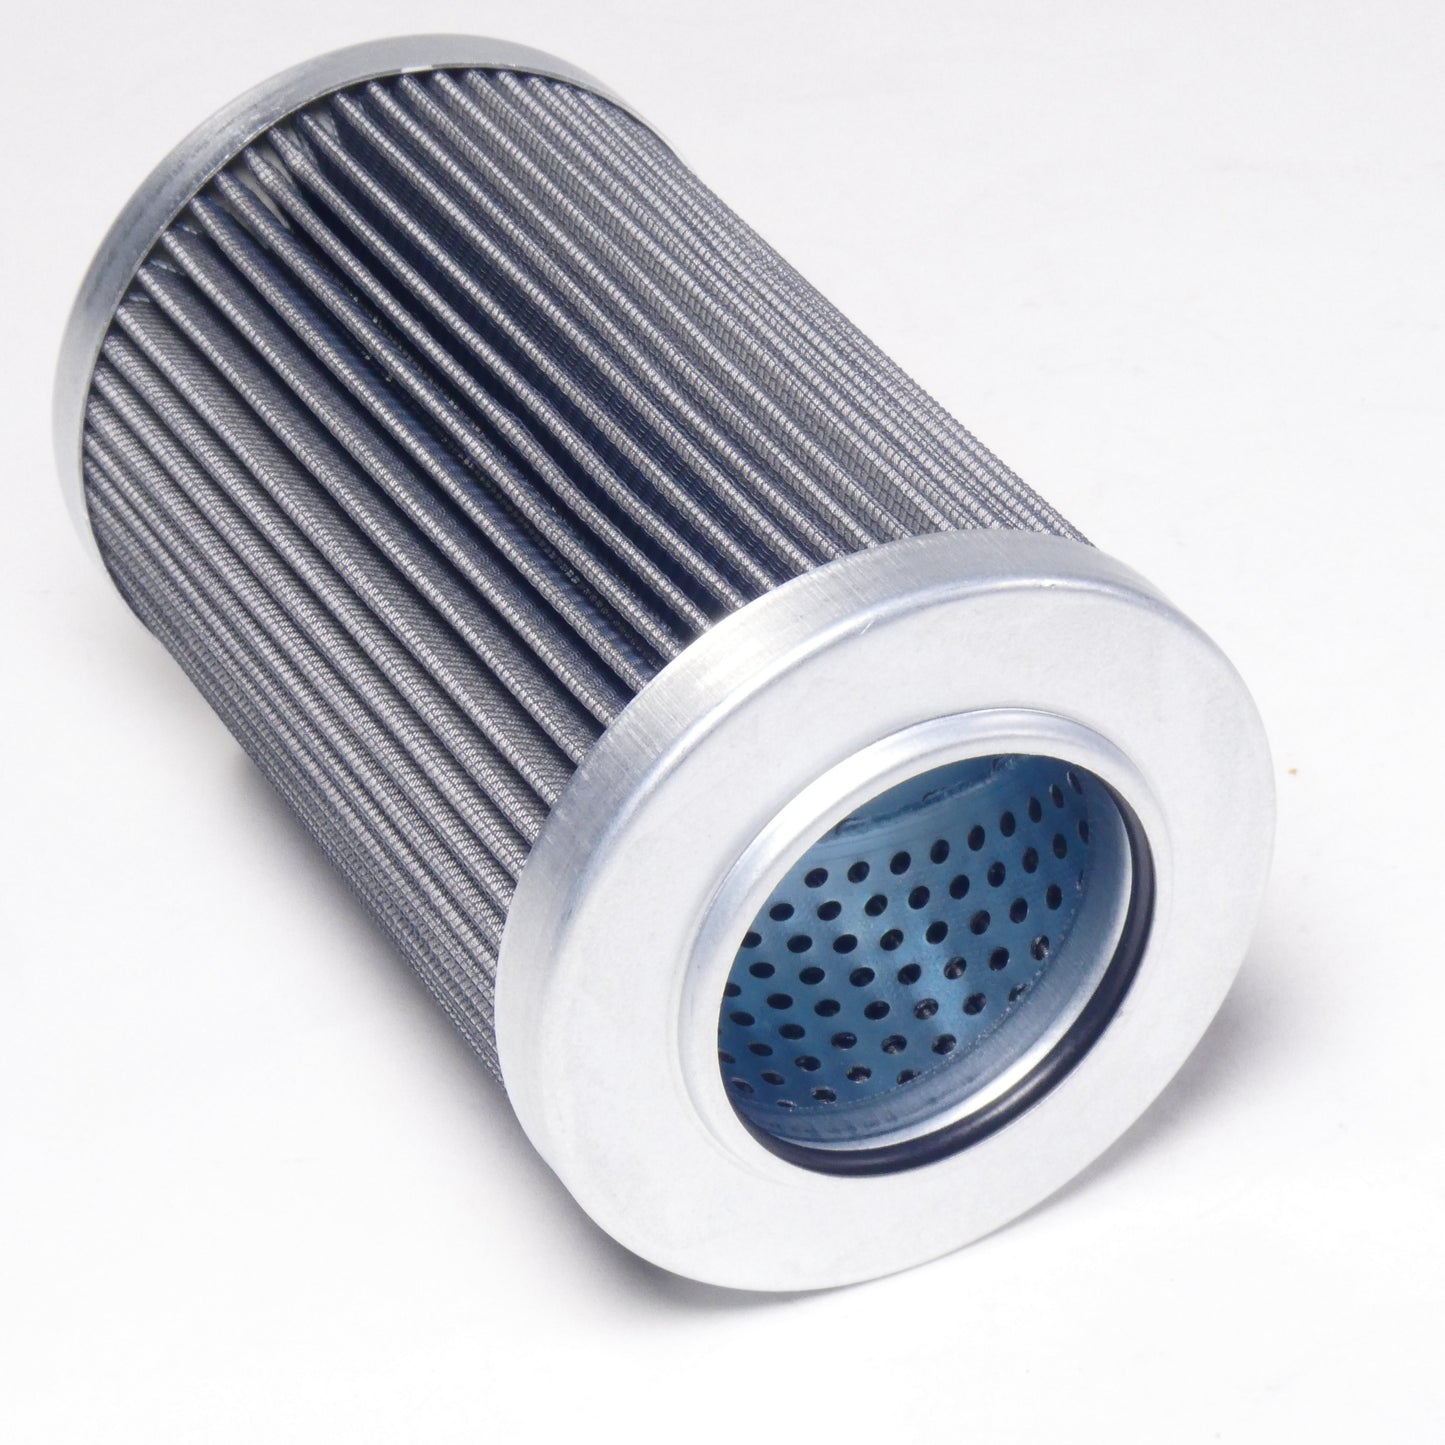 Hydrafil Replacement Filter Element for EPE 1.0020H20SL-A00-0-E